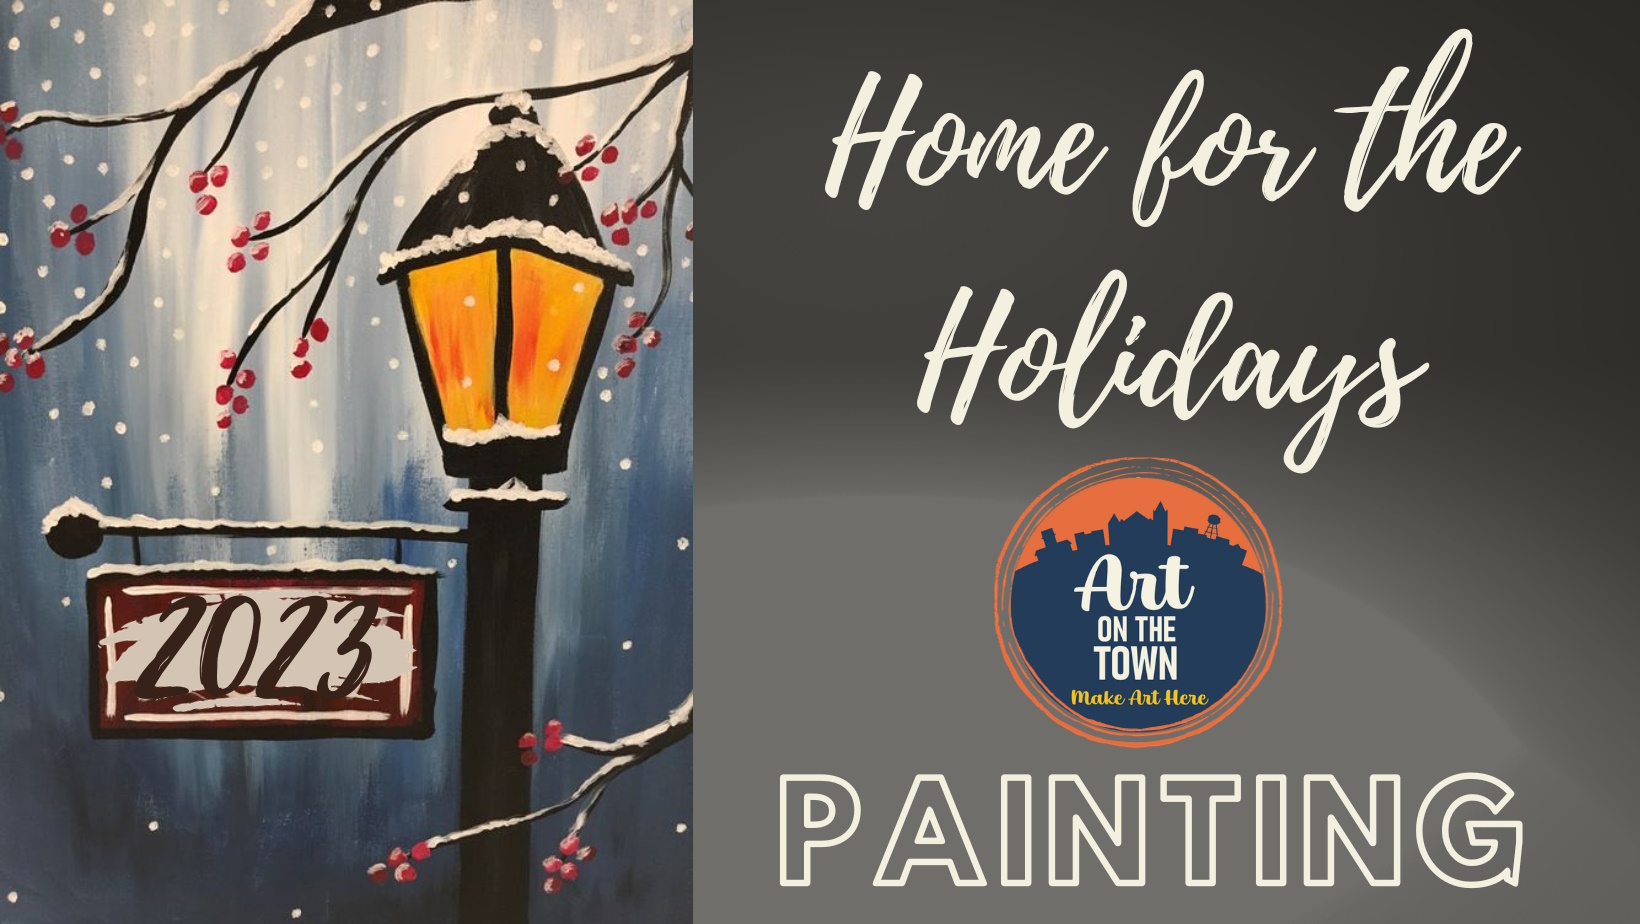 Home for the Holidays Painting